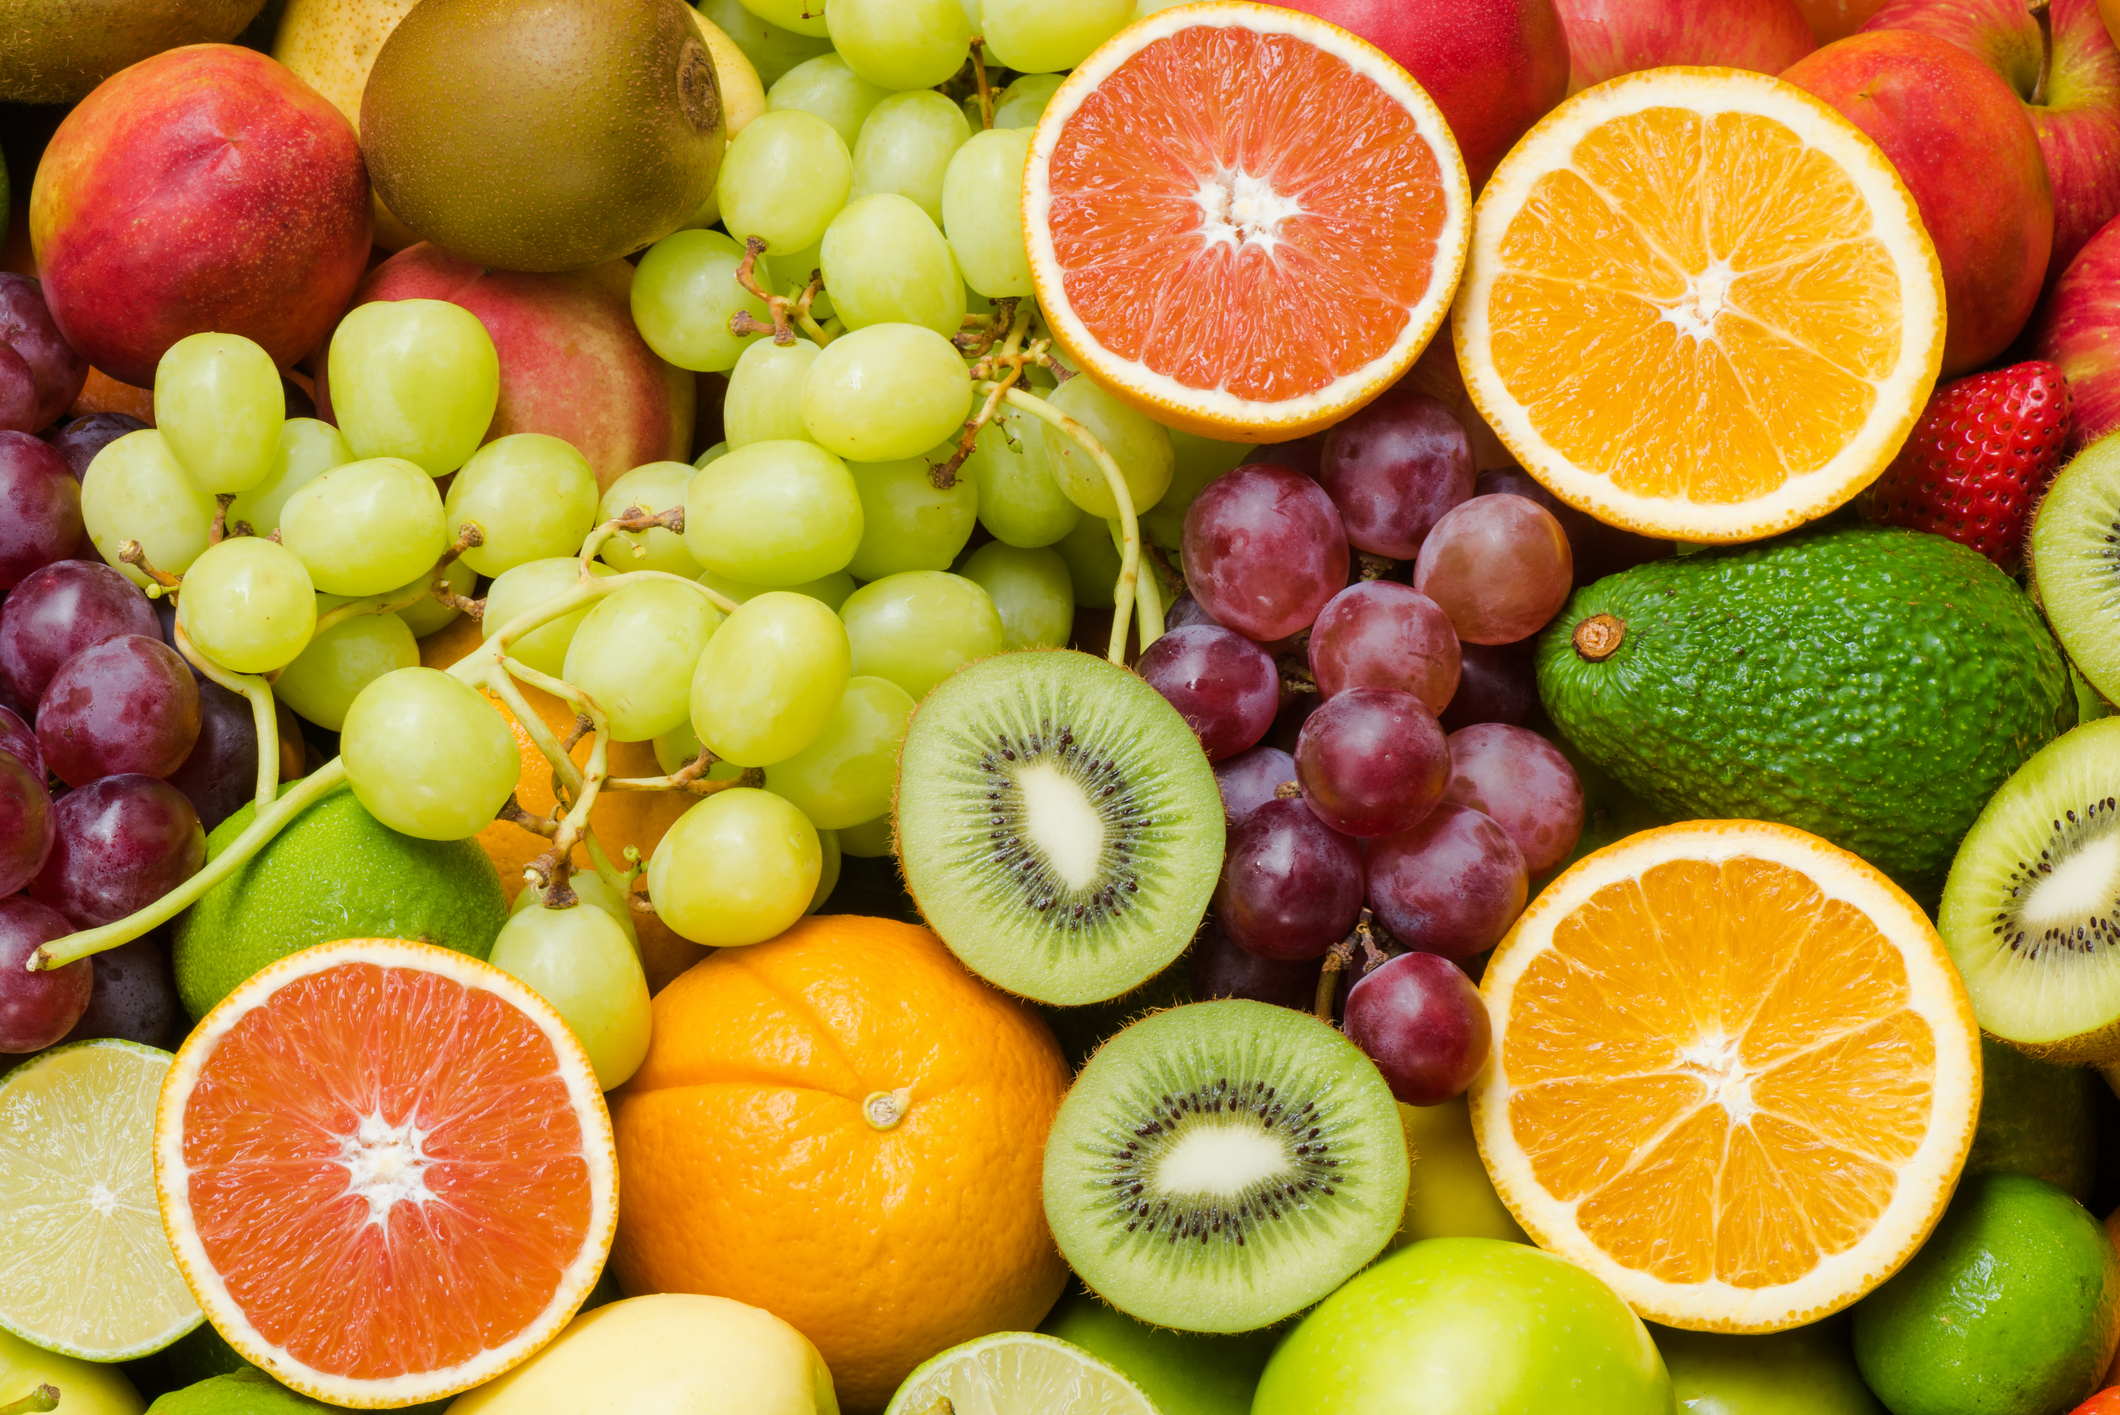 Which Fruits Contain the Most Sugar?